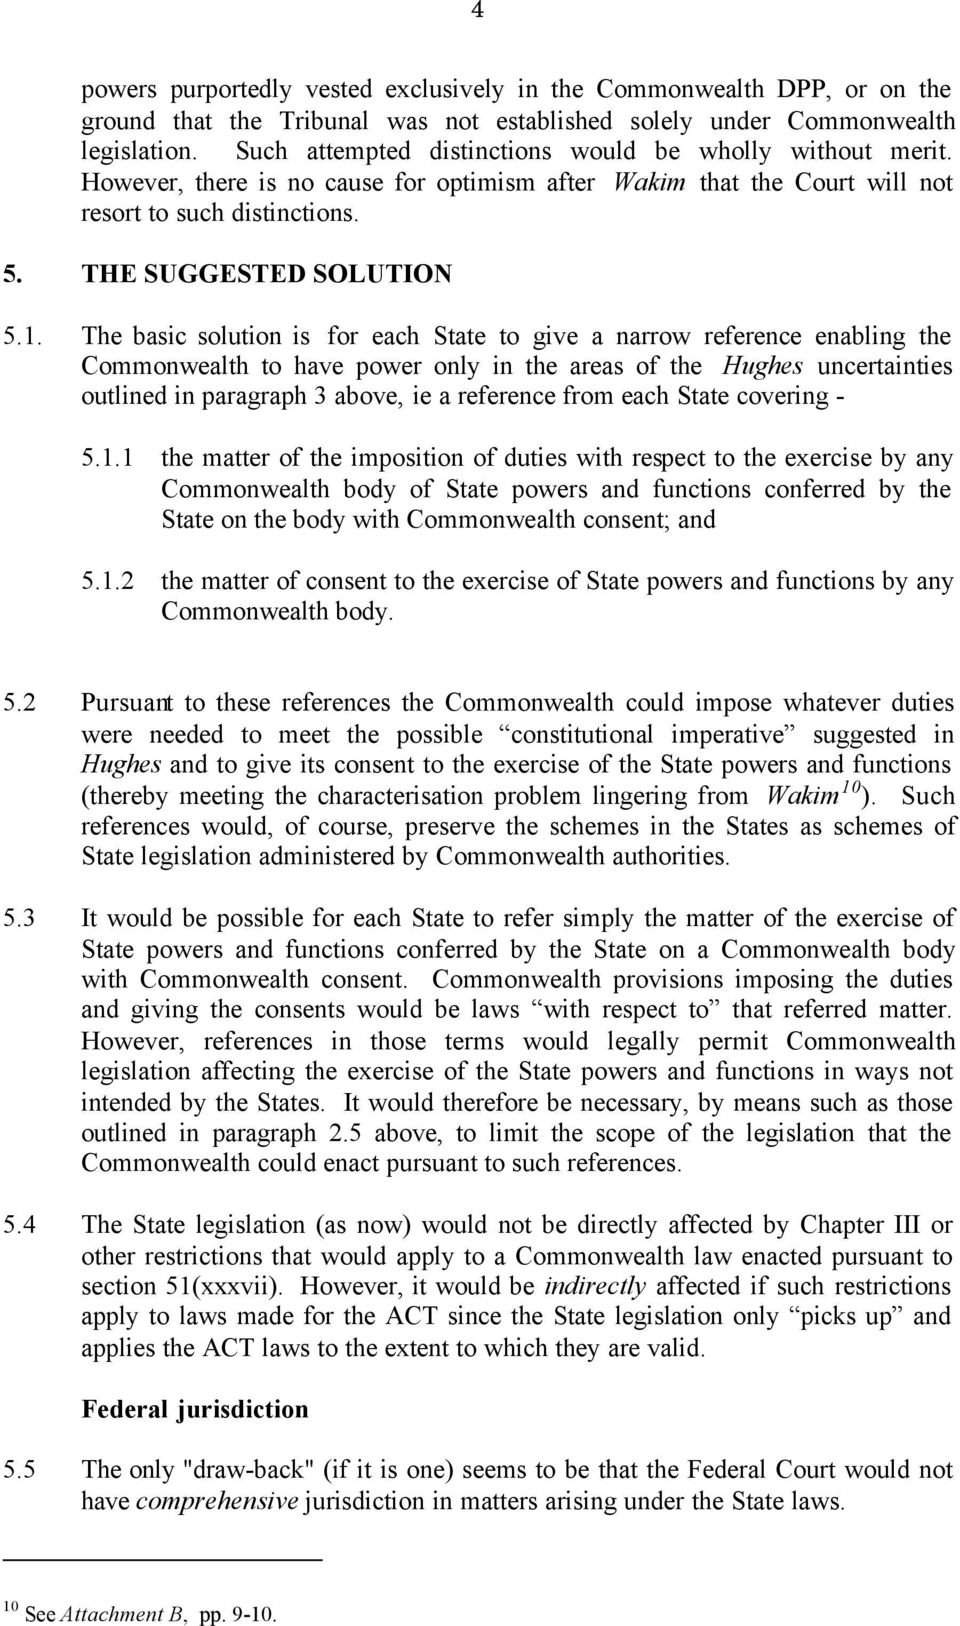 The basic solution is for each State to give a narrow reference enabling the Commonwealth to have power only in the areas of the Hughes uncertainties outlined in paragraph 3 above, ie a reference